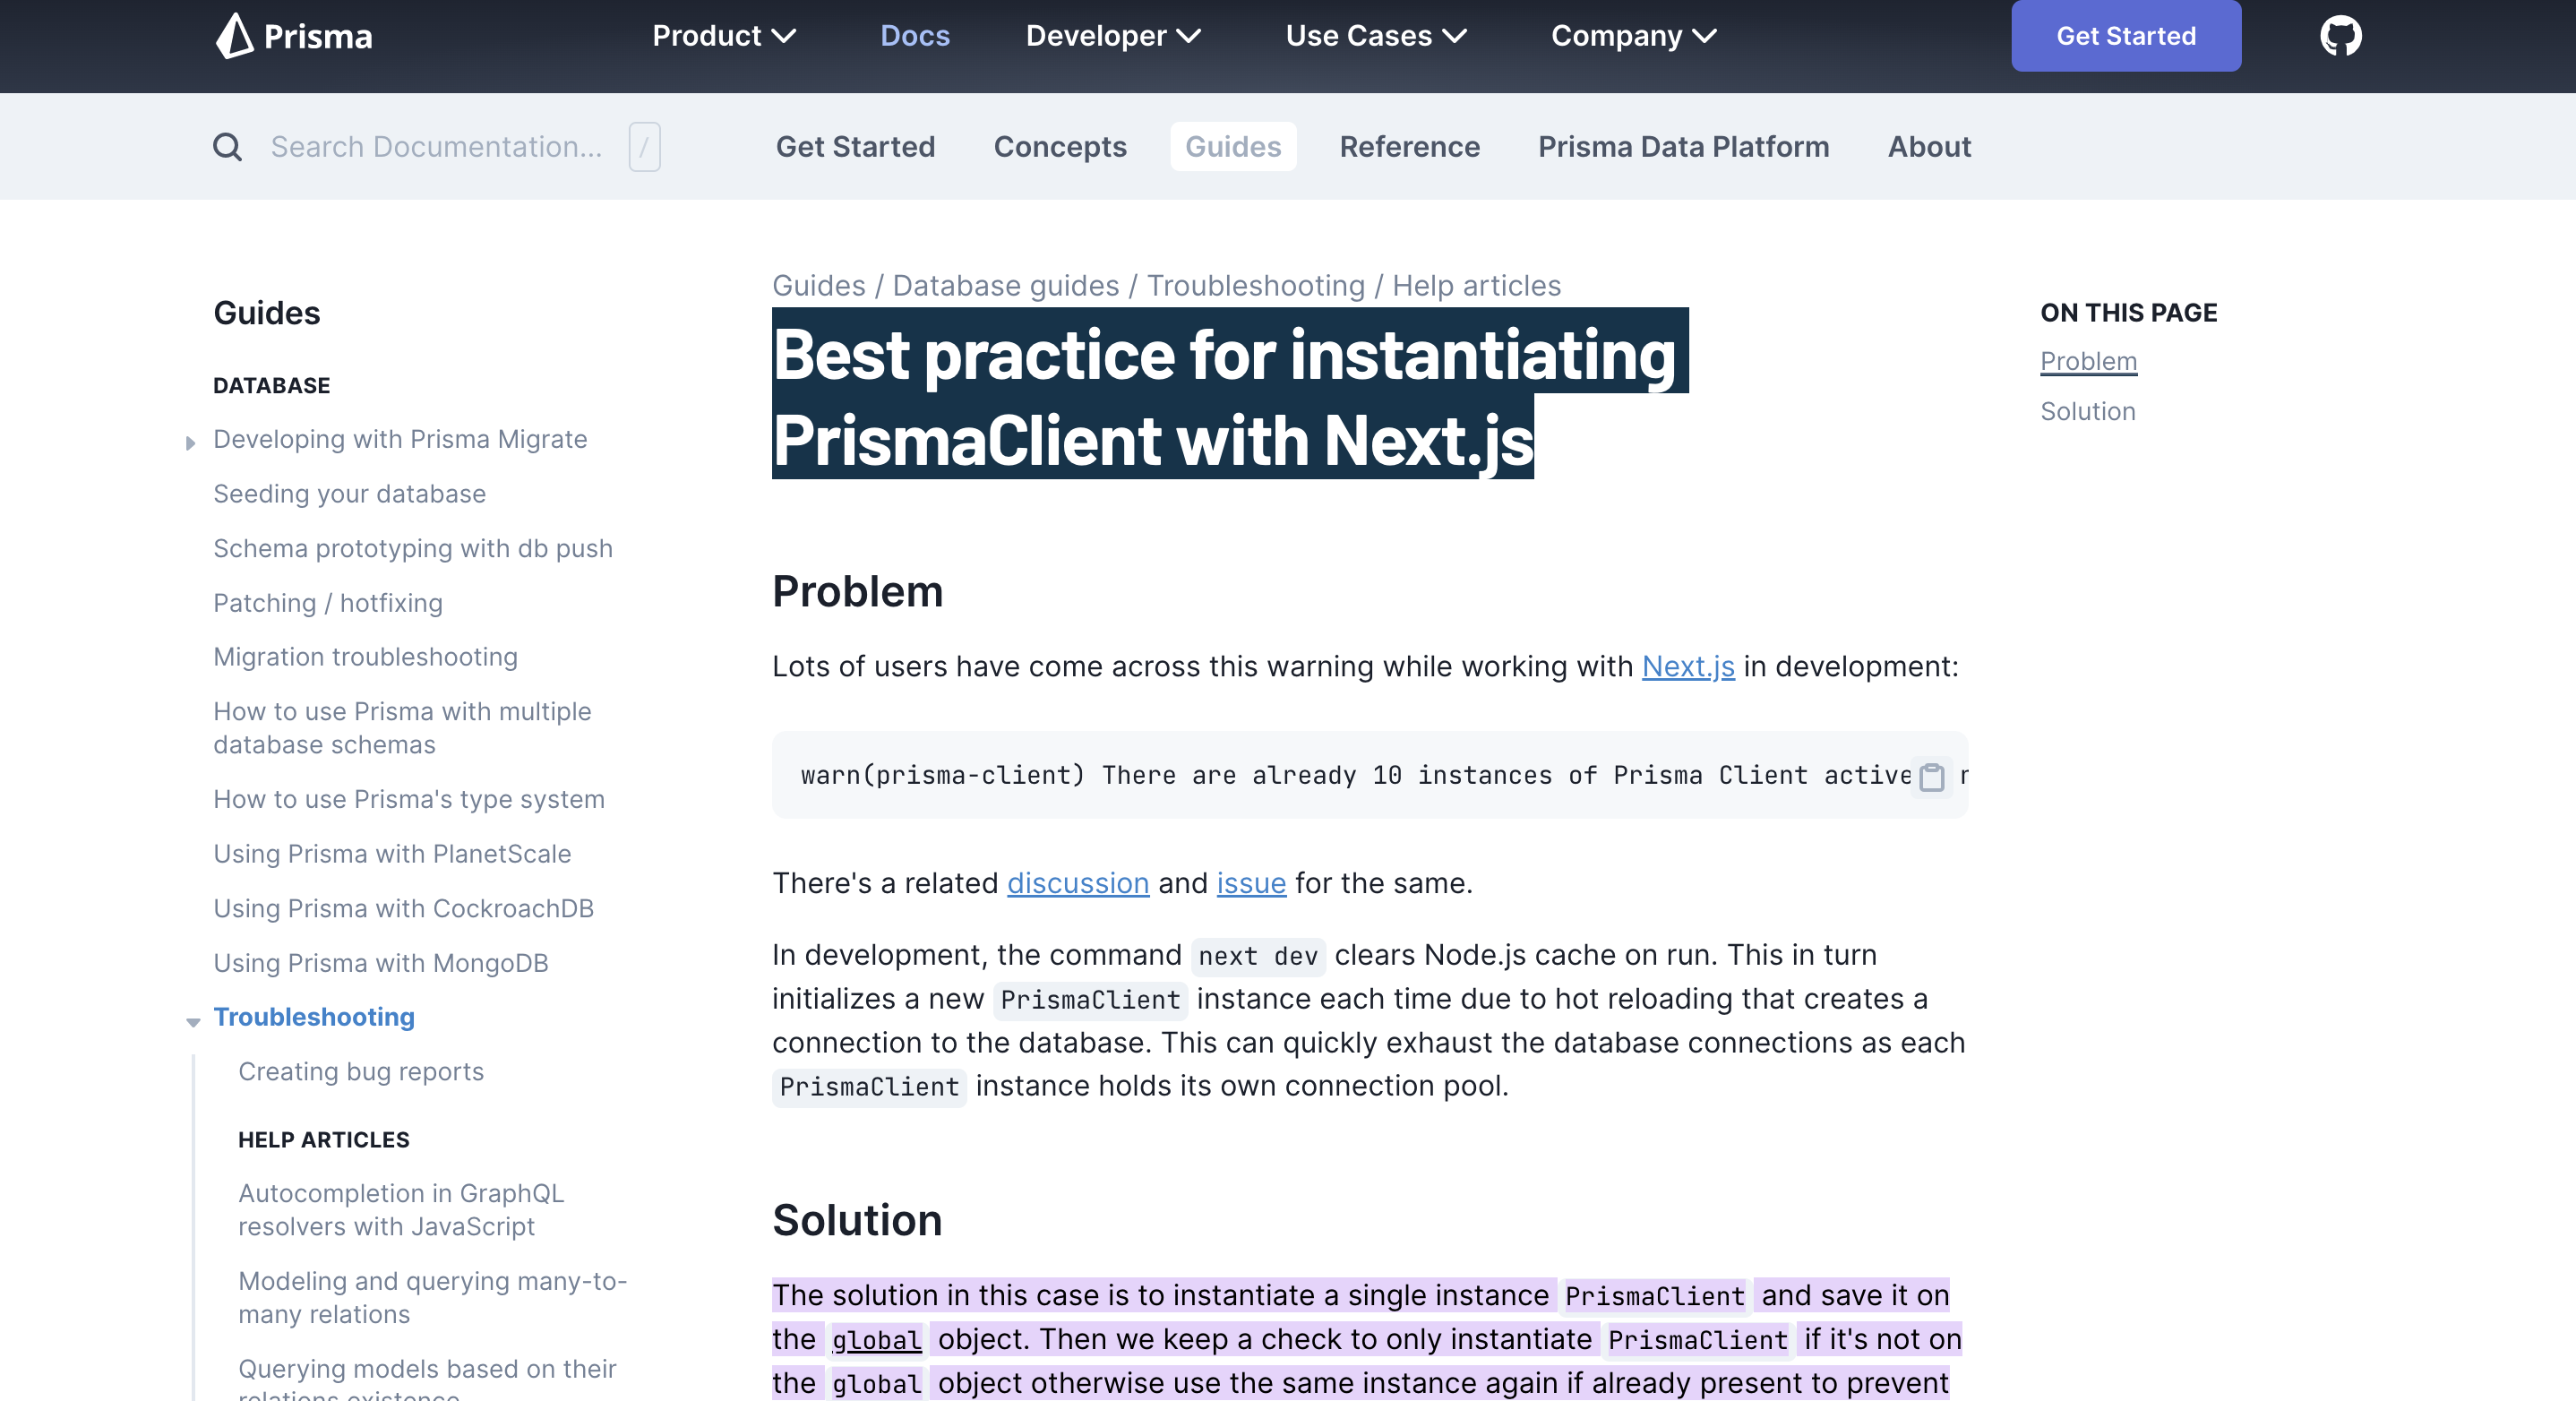 Guide for Setting up Prisma Client with Next.js